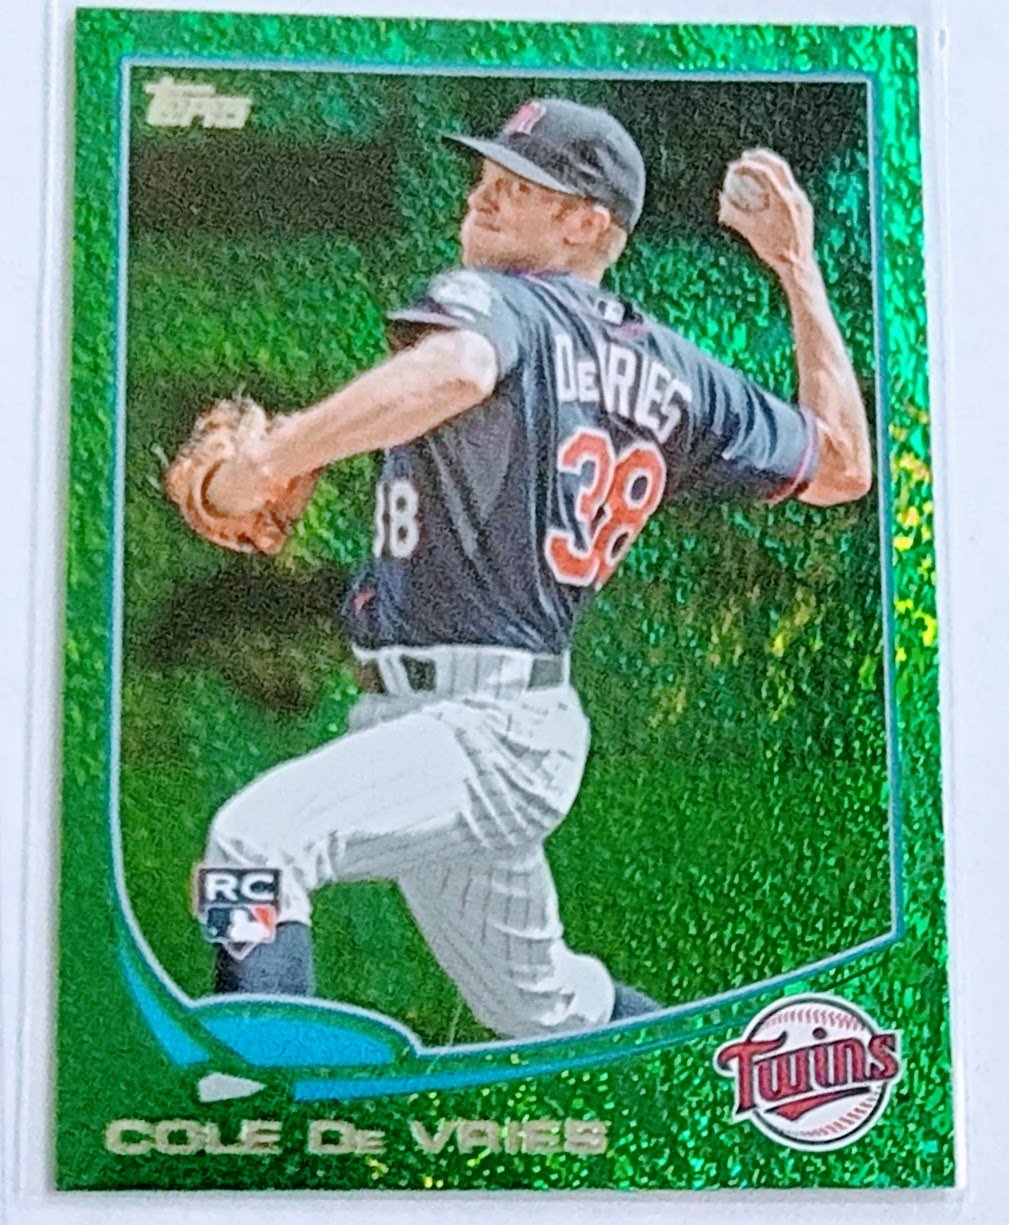 2013 Topps Update Cole De Vries Green Emerald Rookie Baseball Card TPTV simple Xclusive Collectibles   